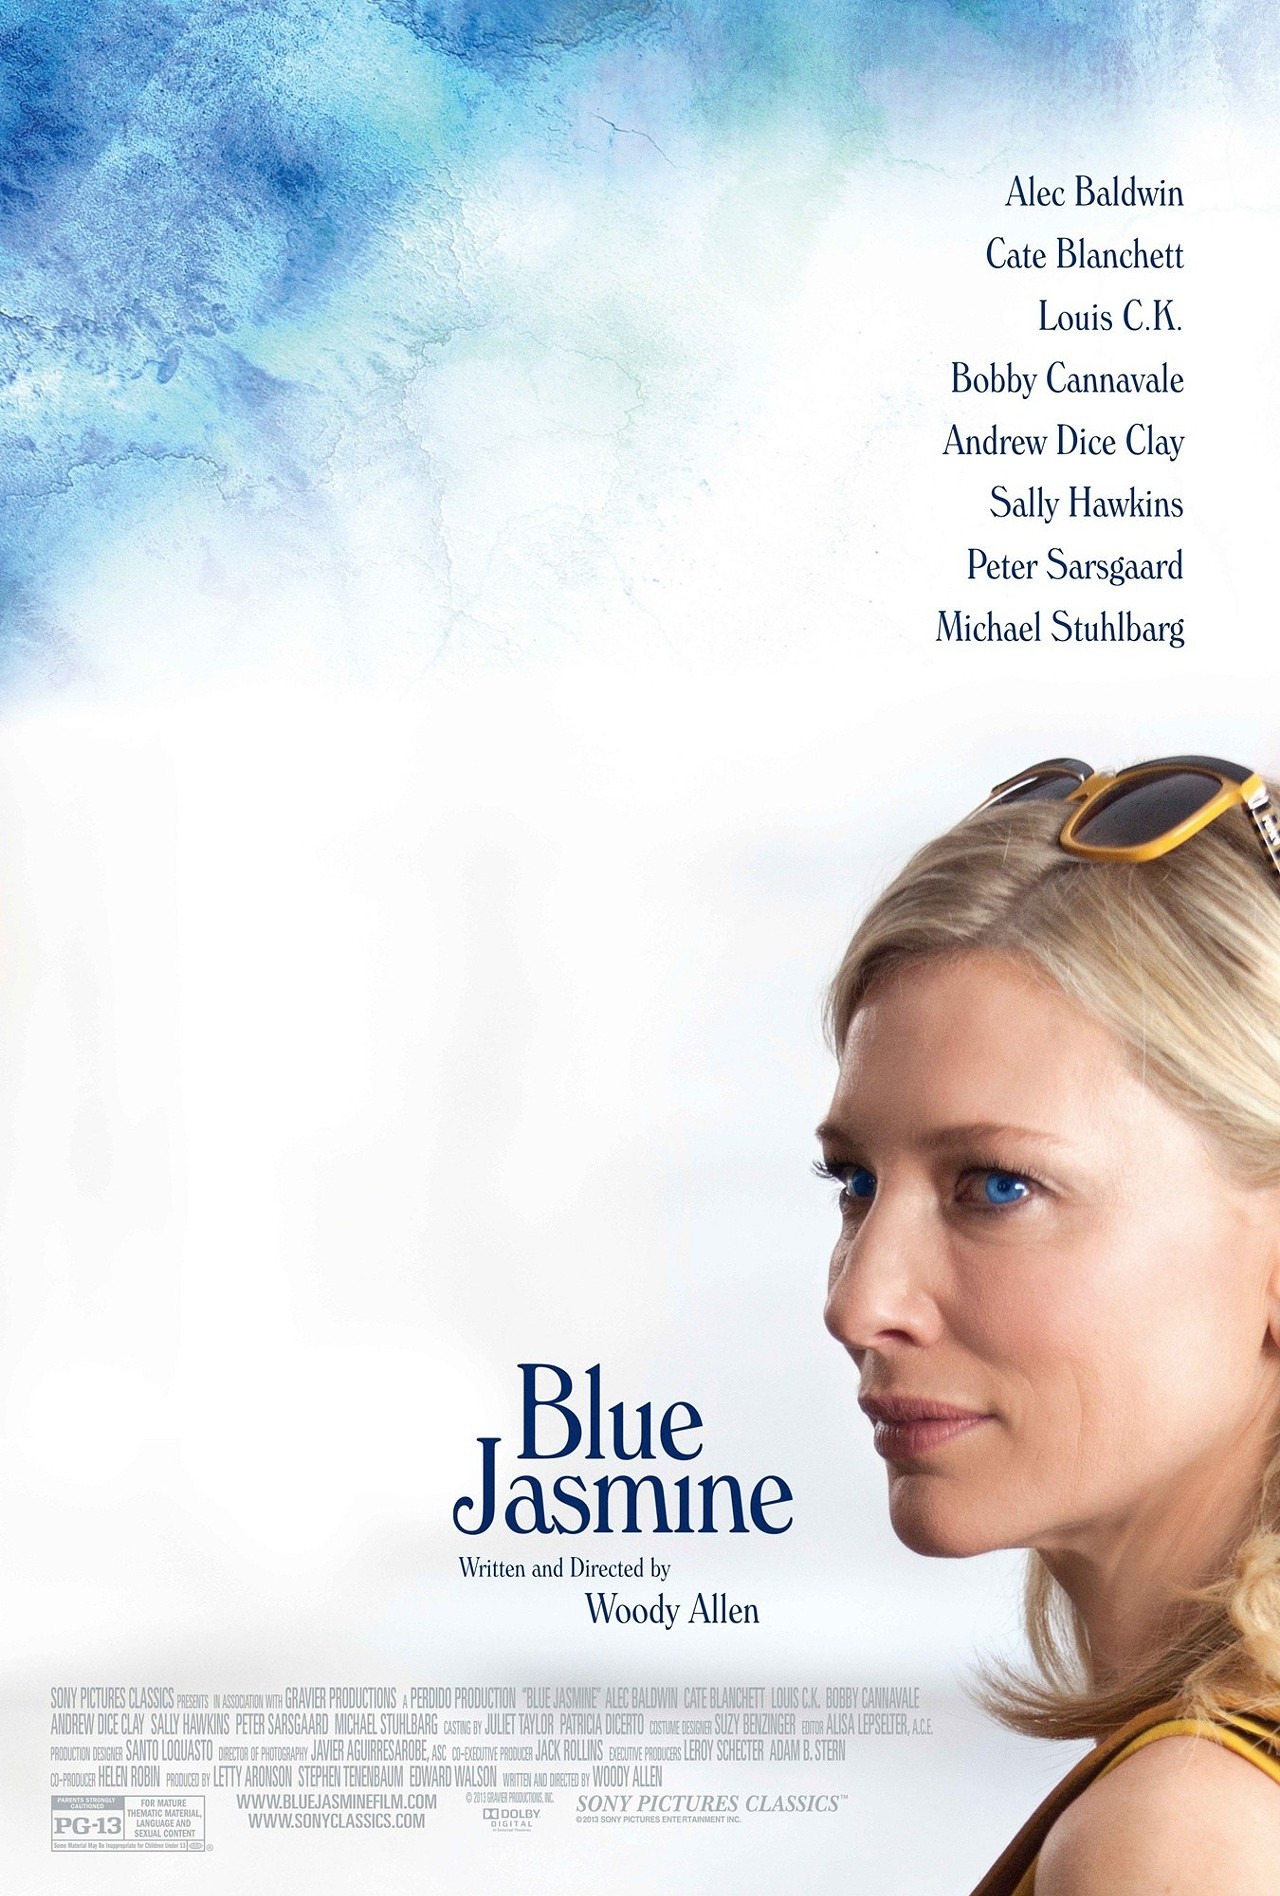 Many critics have rightly called Woody Allen’s Blue Jasmine, which is playing at Cinemark Valley View and at the Cedar Lee Theatre, his best movie in years. And they’re right. Rather than give everyone equal face time, Allen focuses primarily on Jasmine (Cate Blanchett), a self-involved socialite who’s been in a tailspin ever since her wealthy, philandering husband Hal (Alec Baldwin) went to jail on charges of fraud and left her penniless. Neurotic and nervous, Jasmine is quite a character and Allen exploits the fact that she inspires both sympathy and revulsion. He adroitly mixes comedy and tragedy by centering the film on such an anti-hero. She experiences the kind of quick decline that can happen to anyone, and that’s this film’s biggest strength. She experiences the kind of sudden financial turnaround that we all fear. (Niesel)